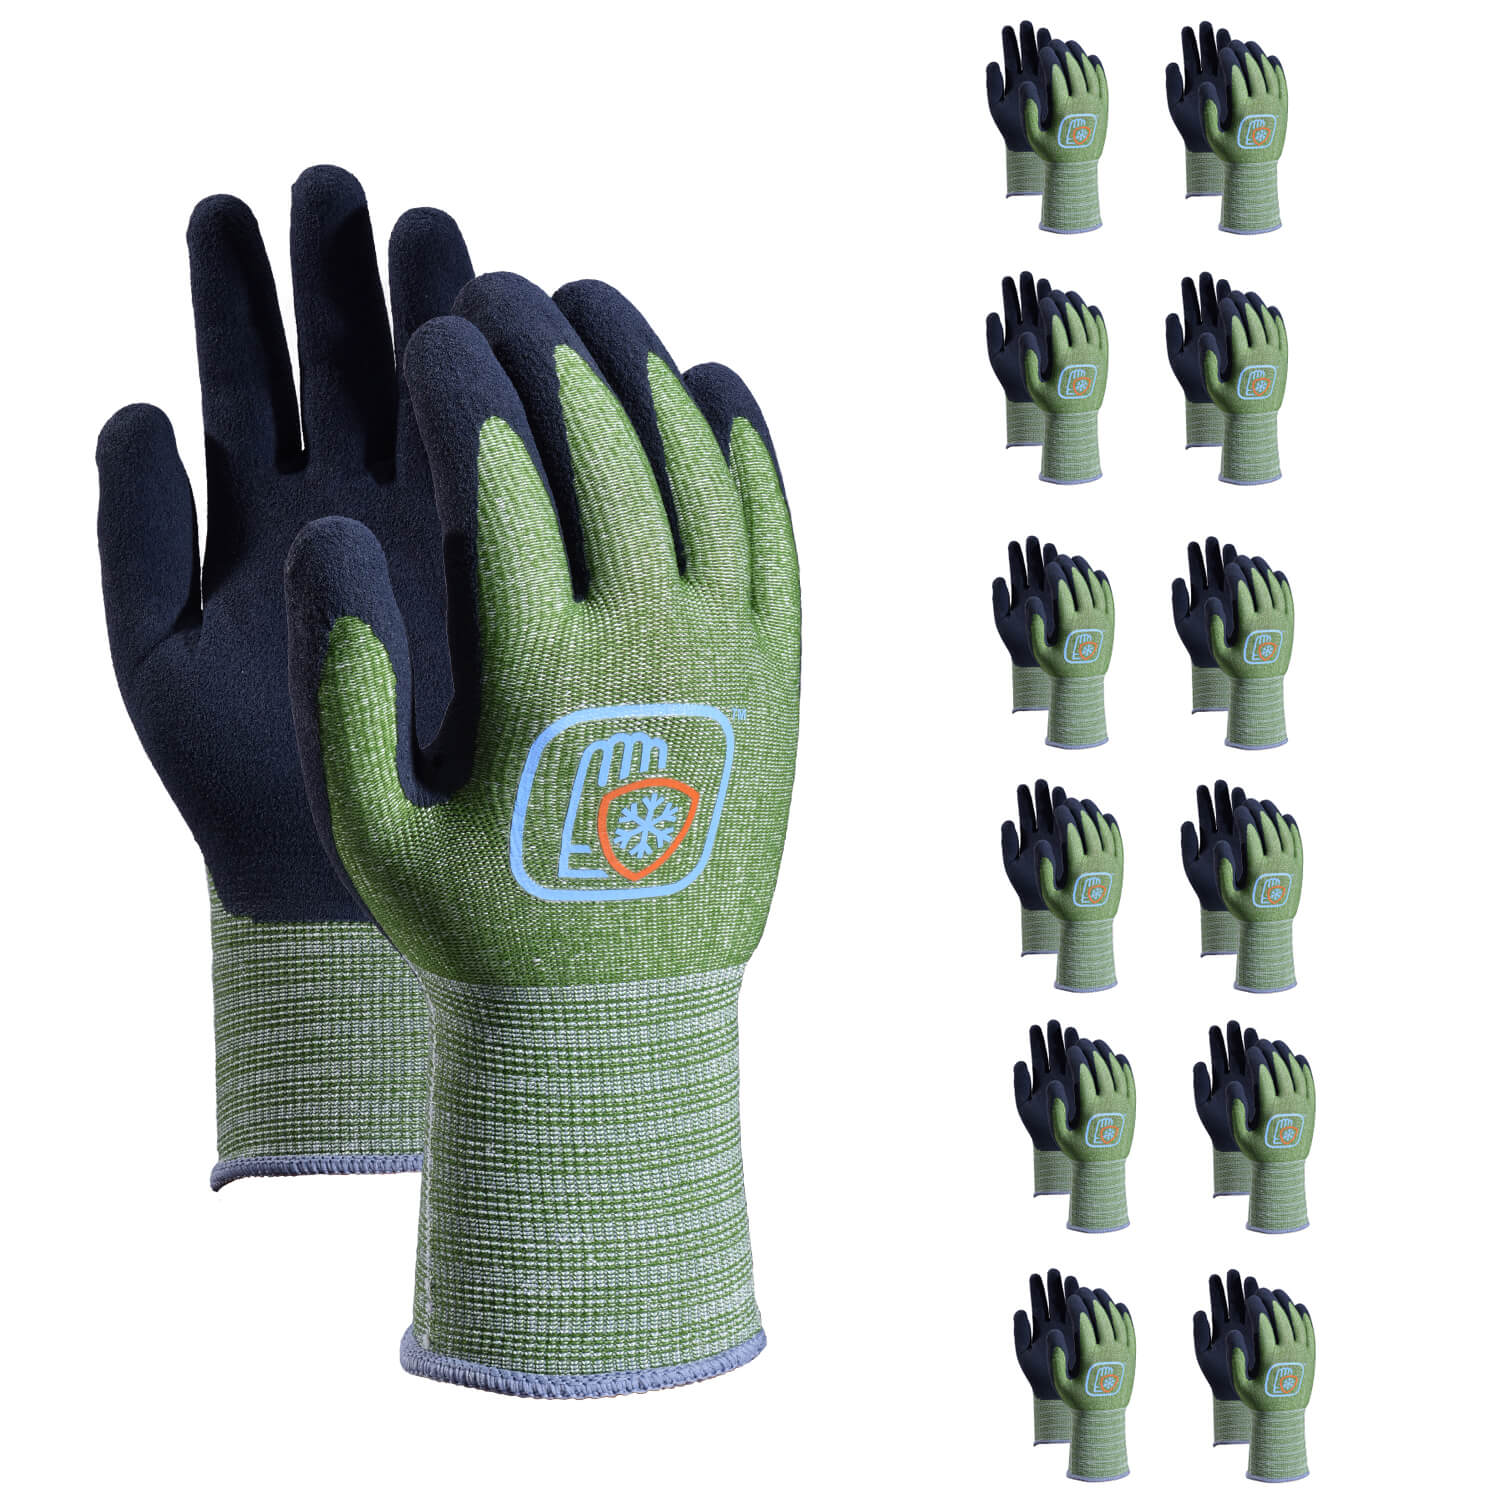 SAFEYEAR 12 Pairs Safety Gloves Waterproof Natural Latex Coated Work Gloves